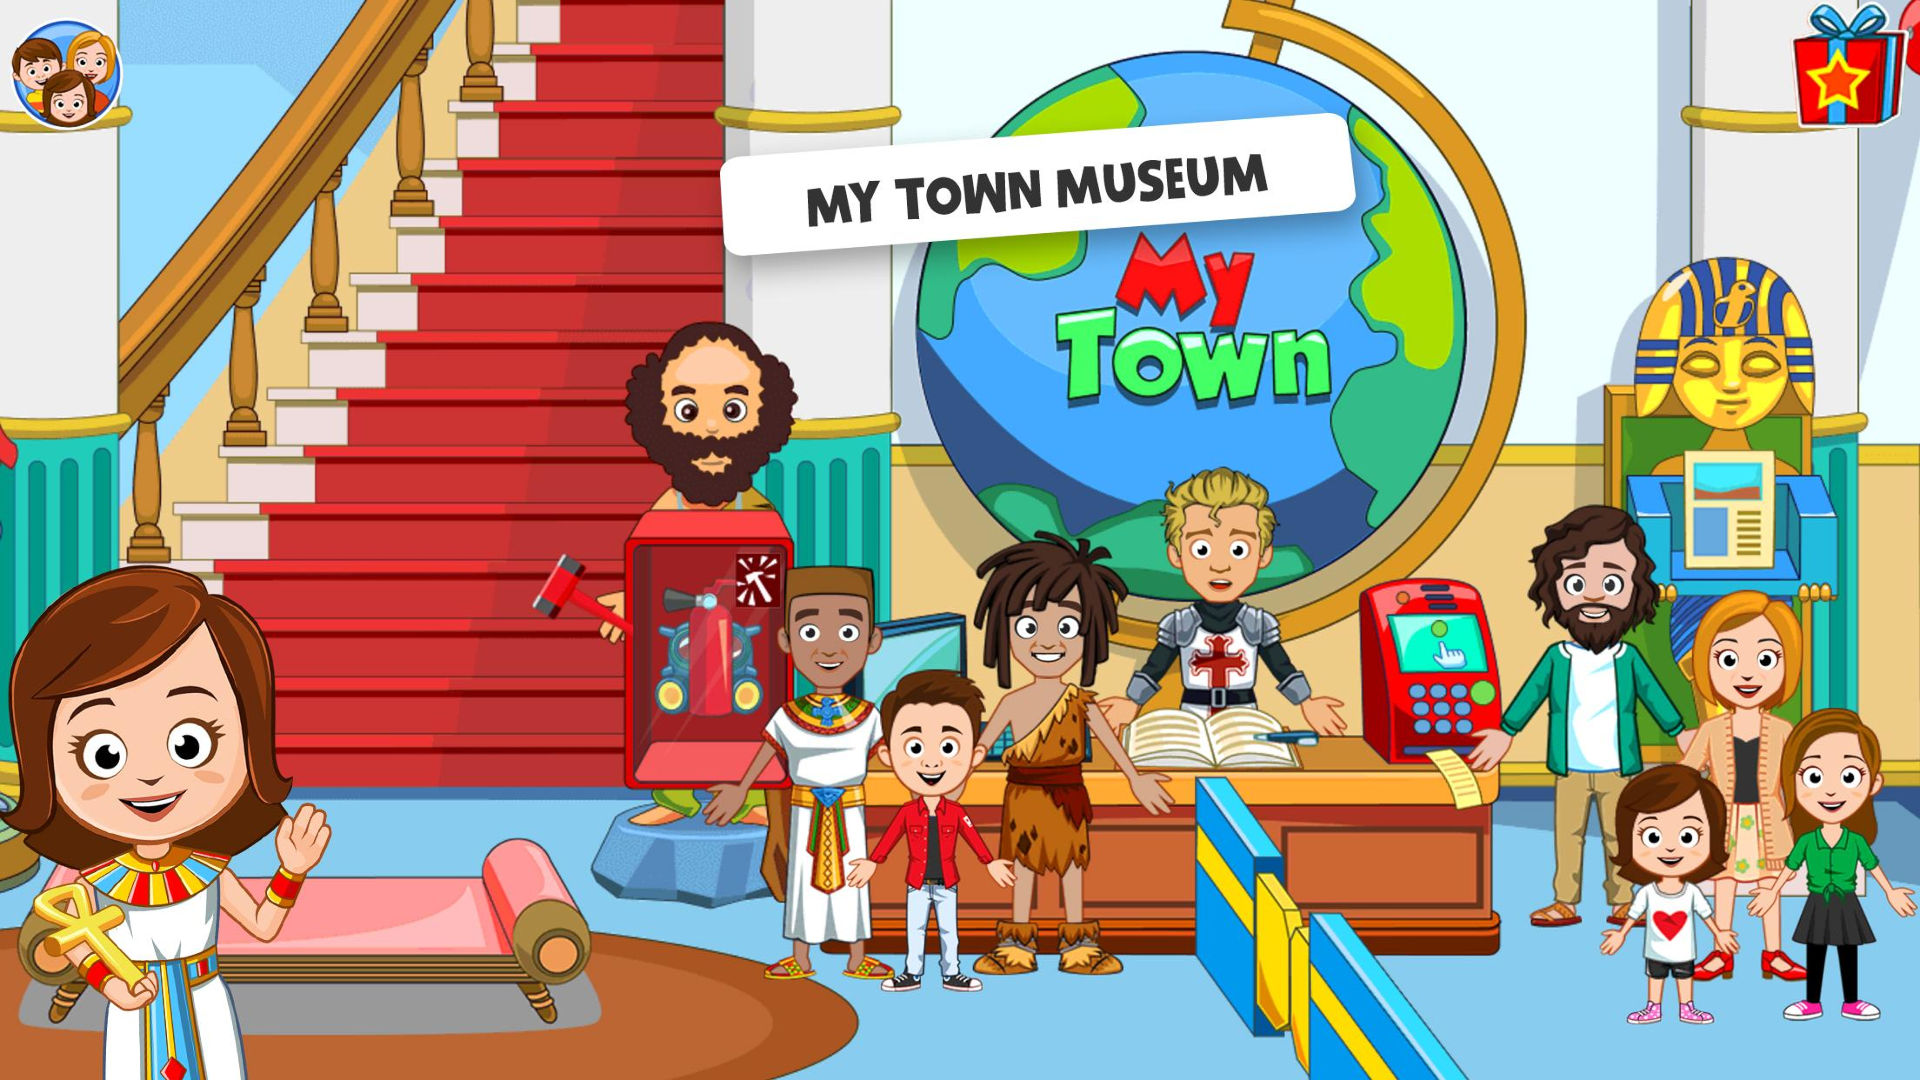 My Town Museum screenshot showing multiple characters stood in a museum